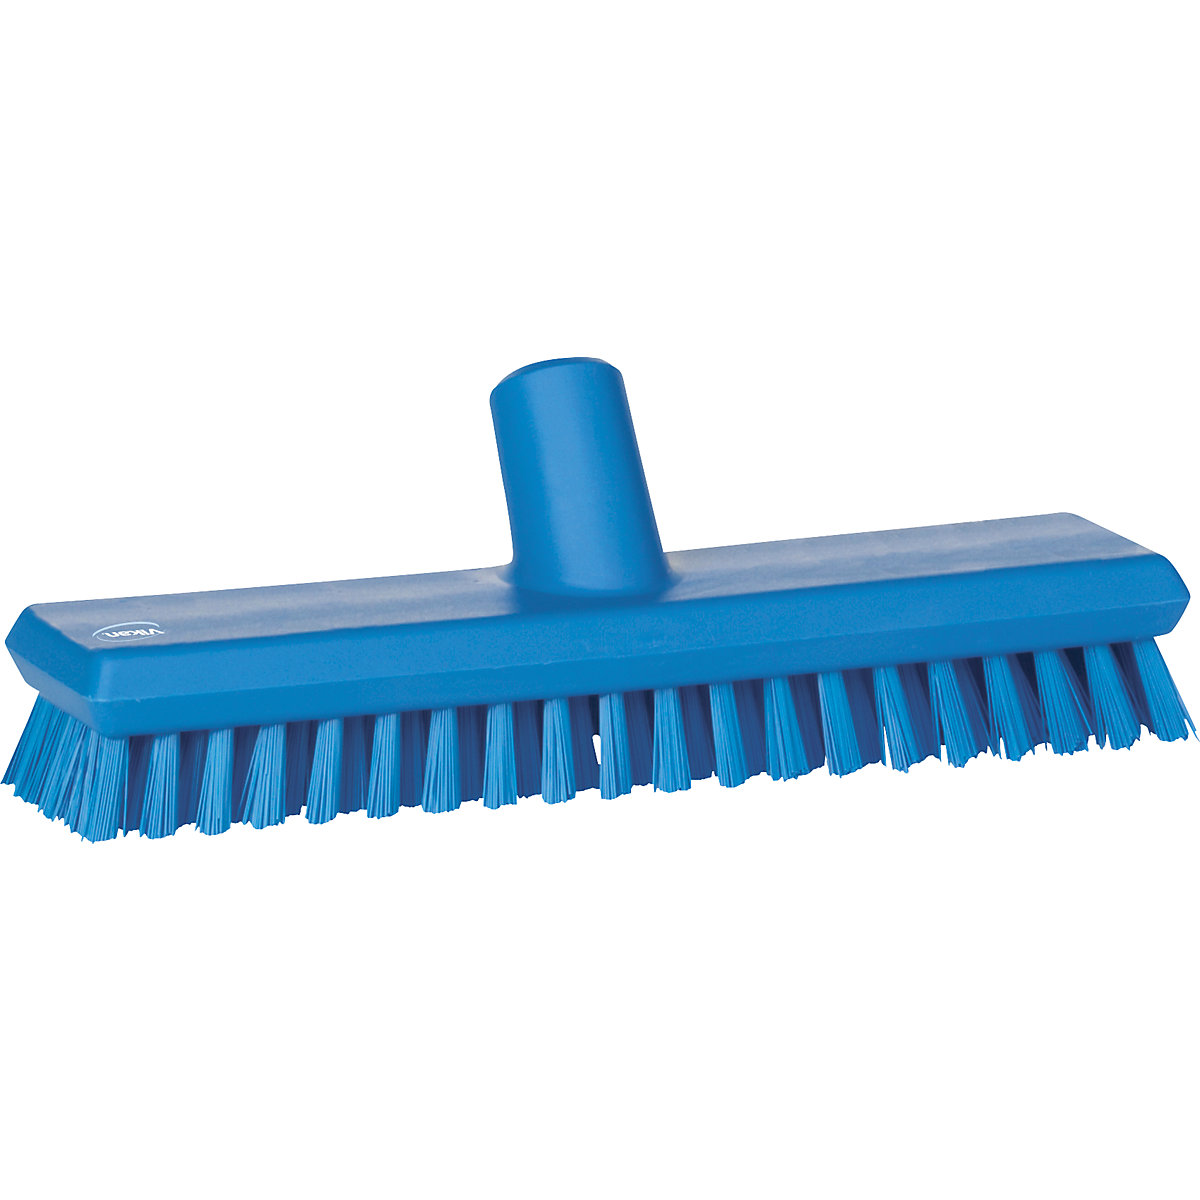 Scrubber with water channel - Vikan